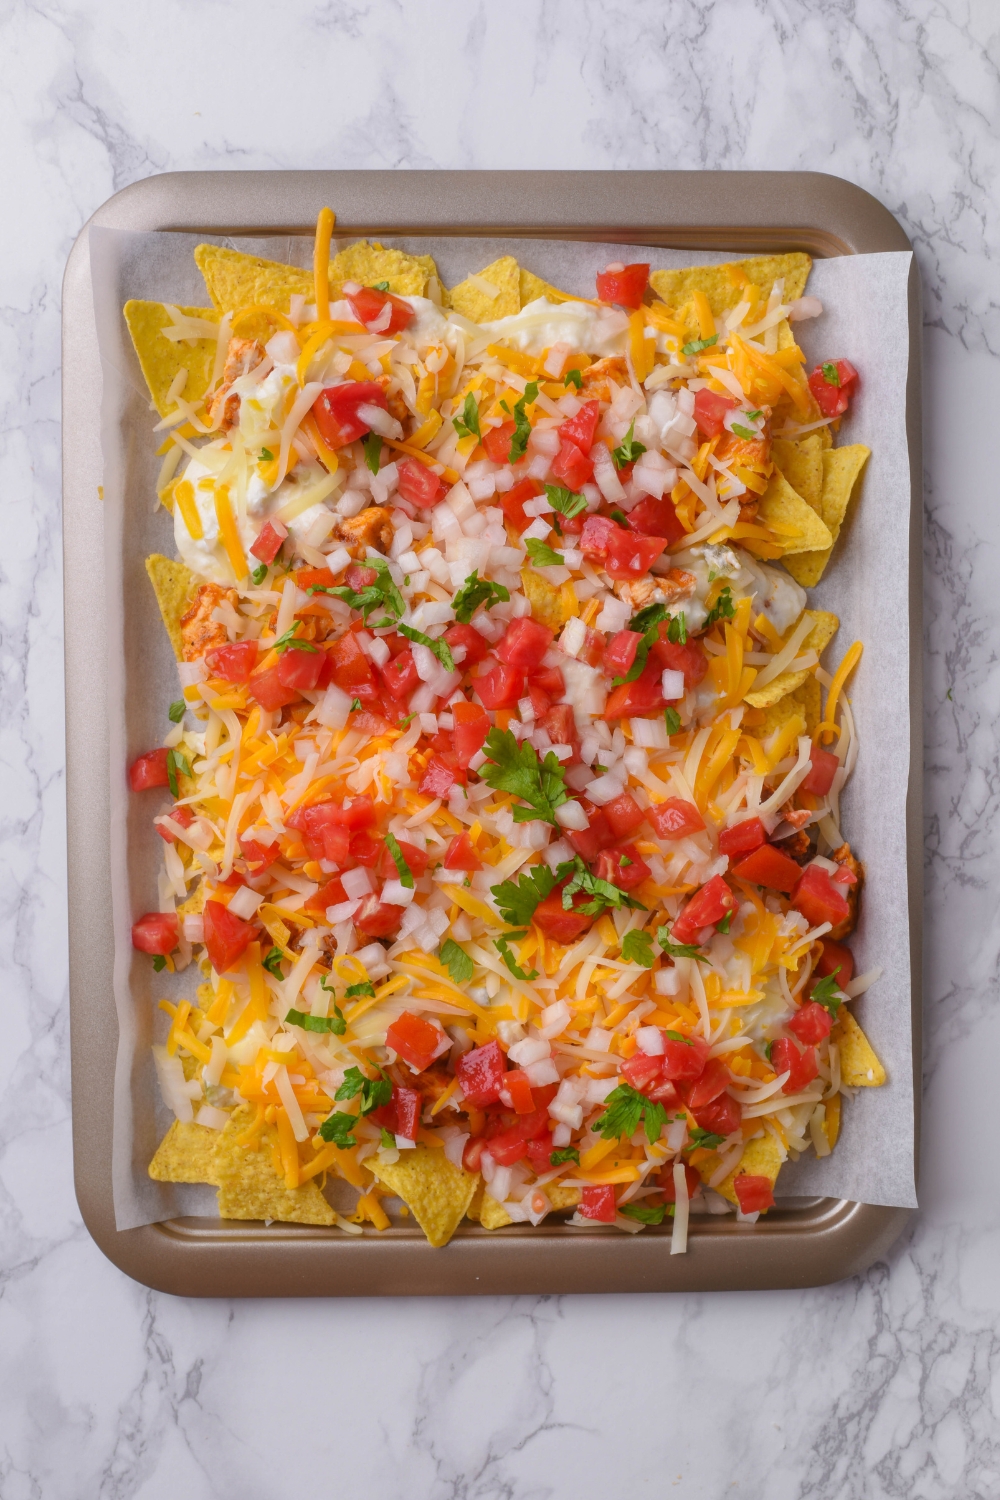 A baking sheet lined with parchment paper topped with tortilla chips, shredded cheese, and pico de gallo.